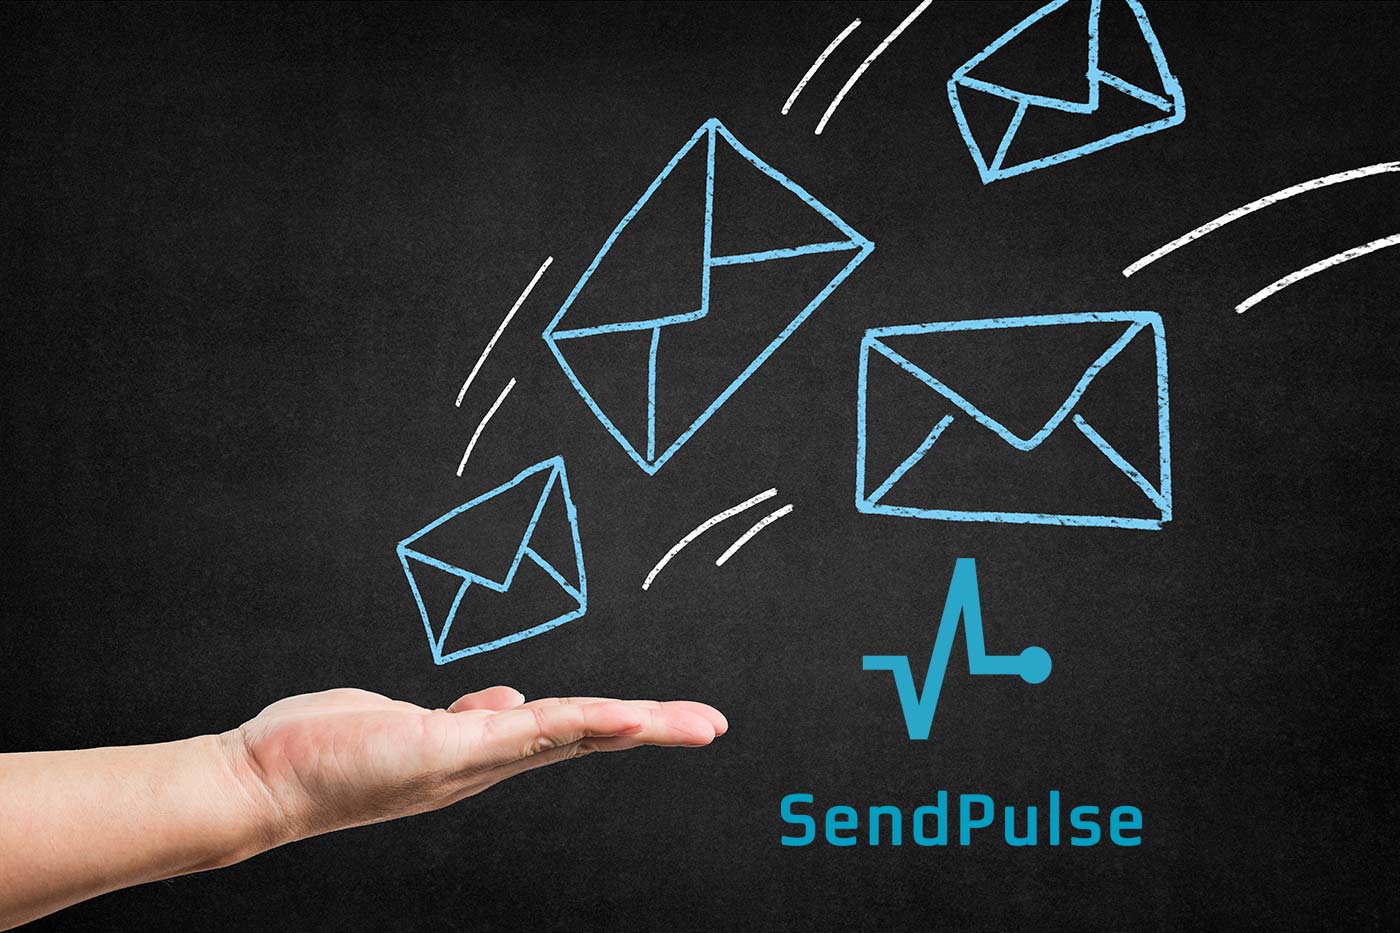 SendPulse is now supported in Urgency Coupons for Mailing Lists